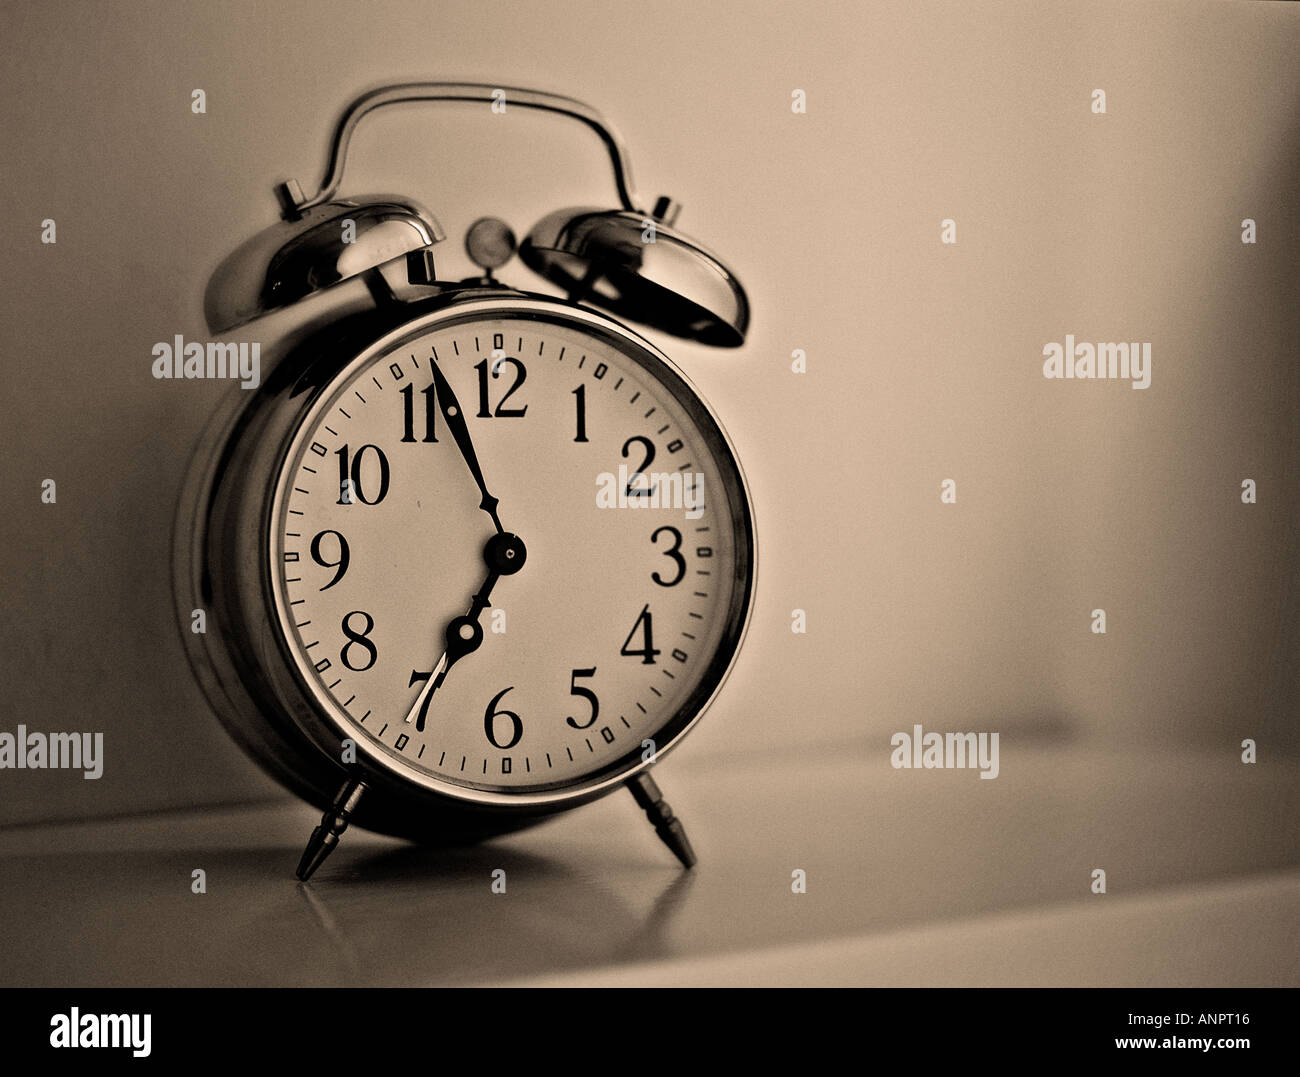 an old fashioned alarm clock Stock Photo